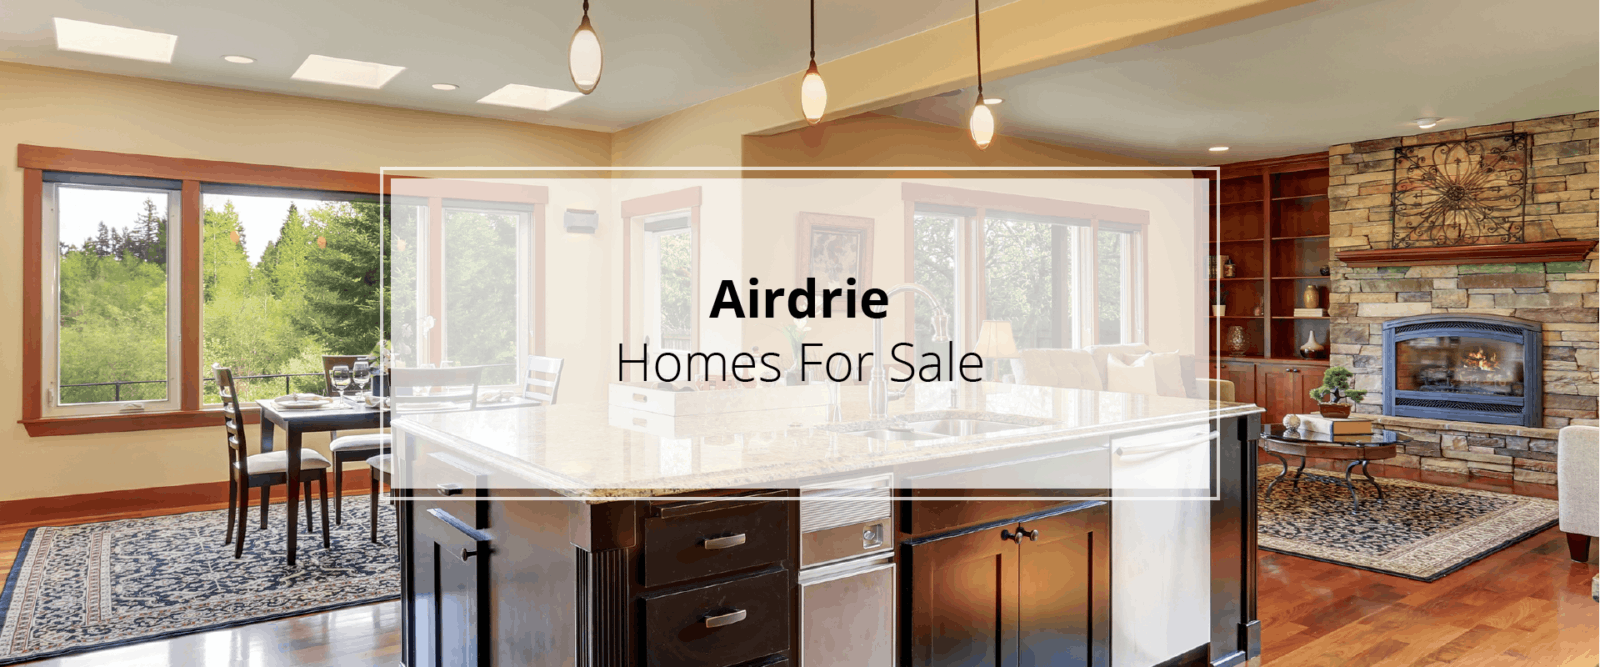 Airdrie Homes For Sale Button